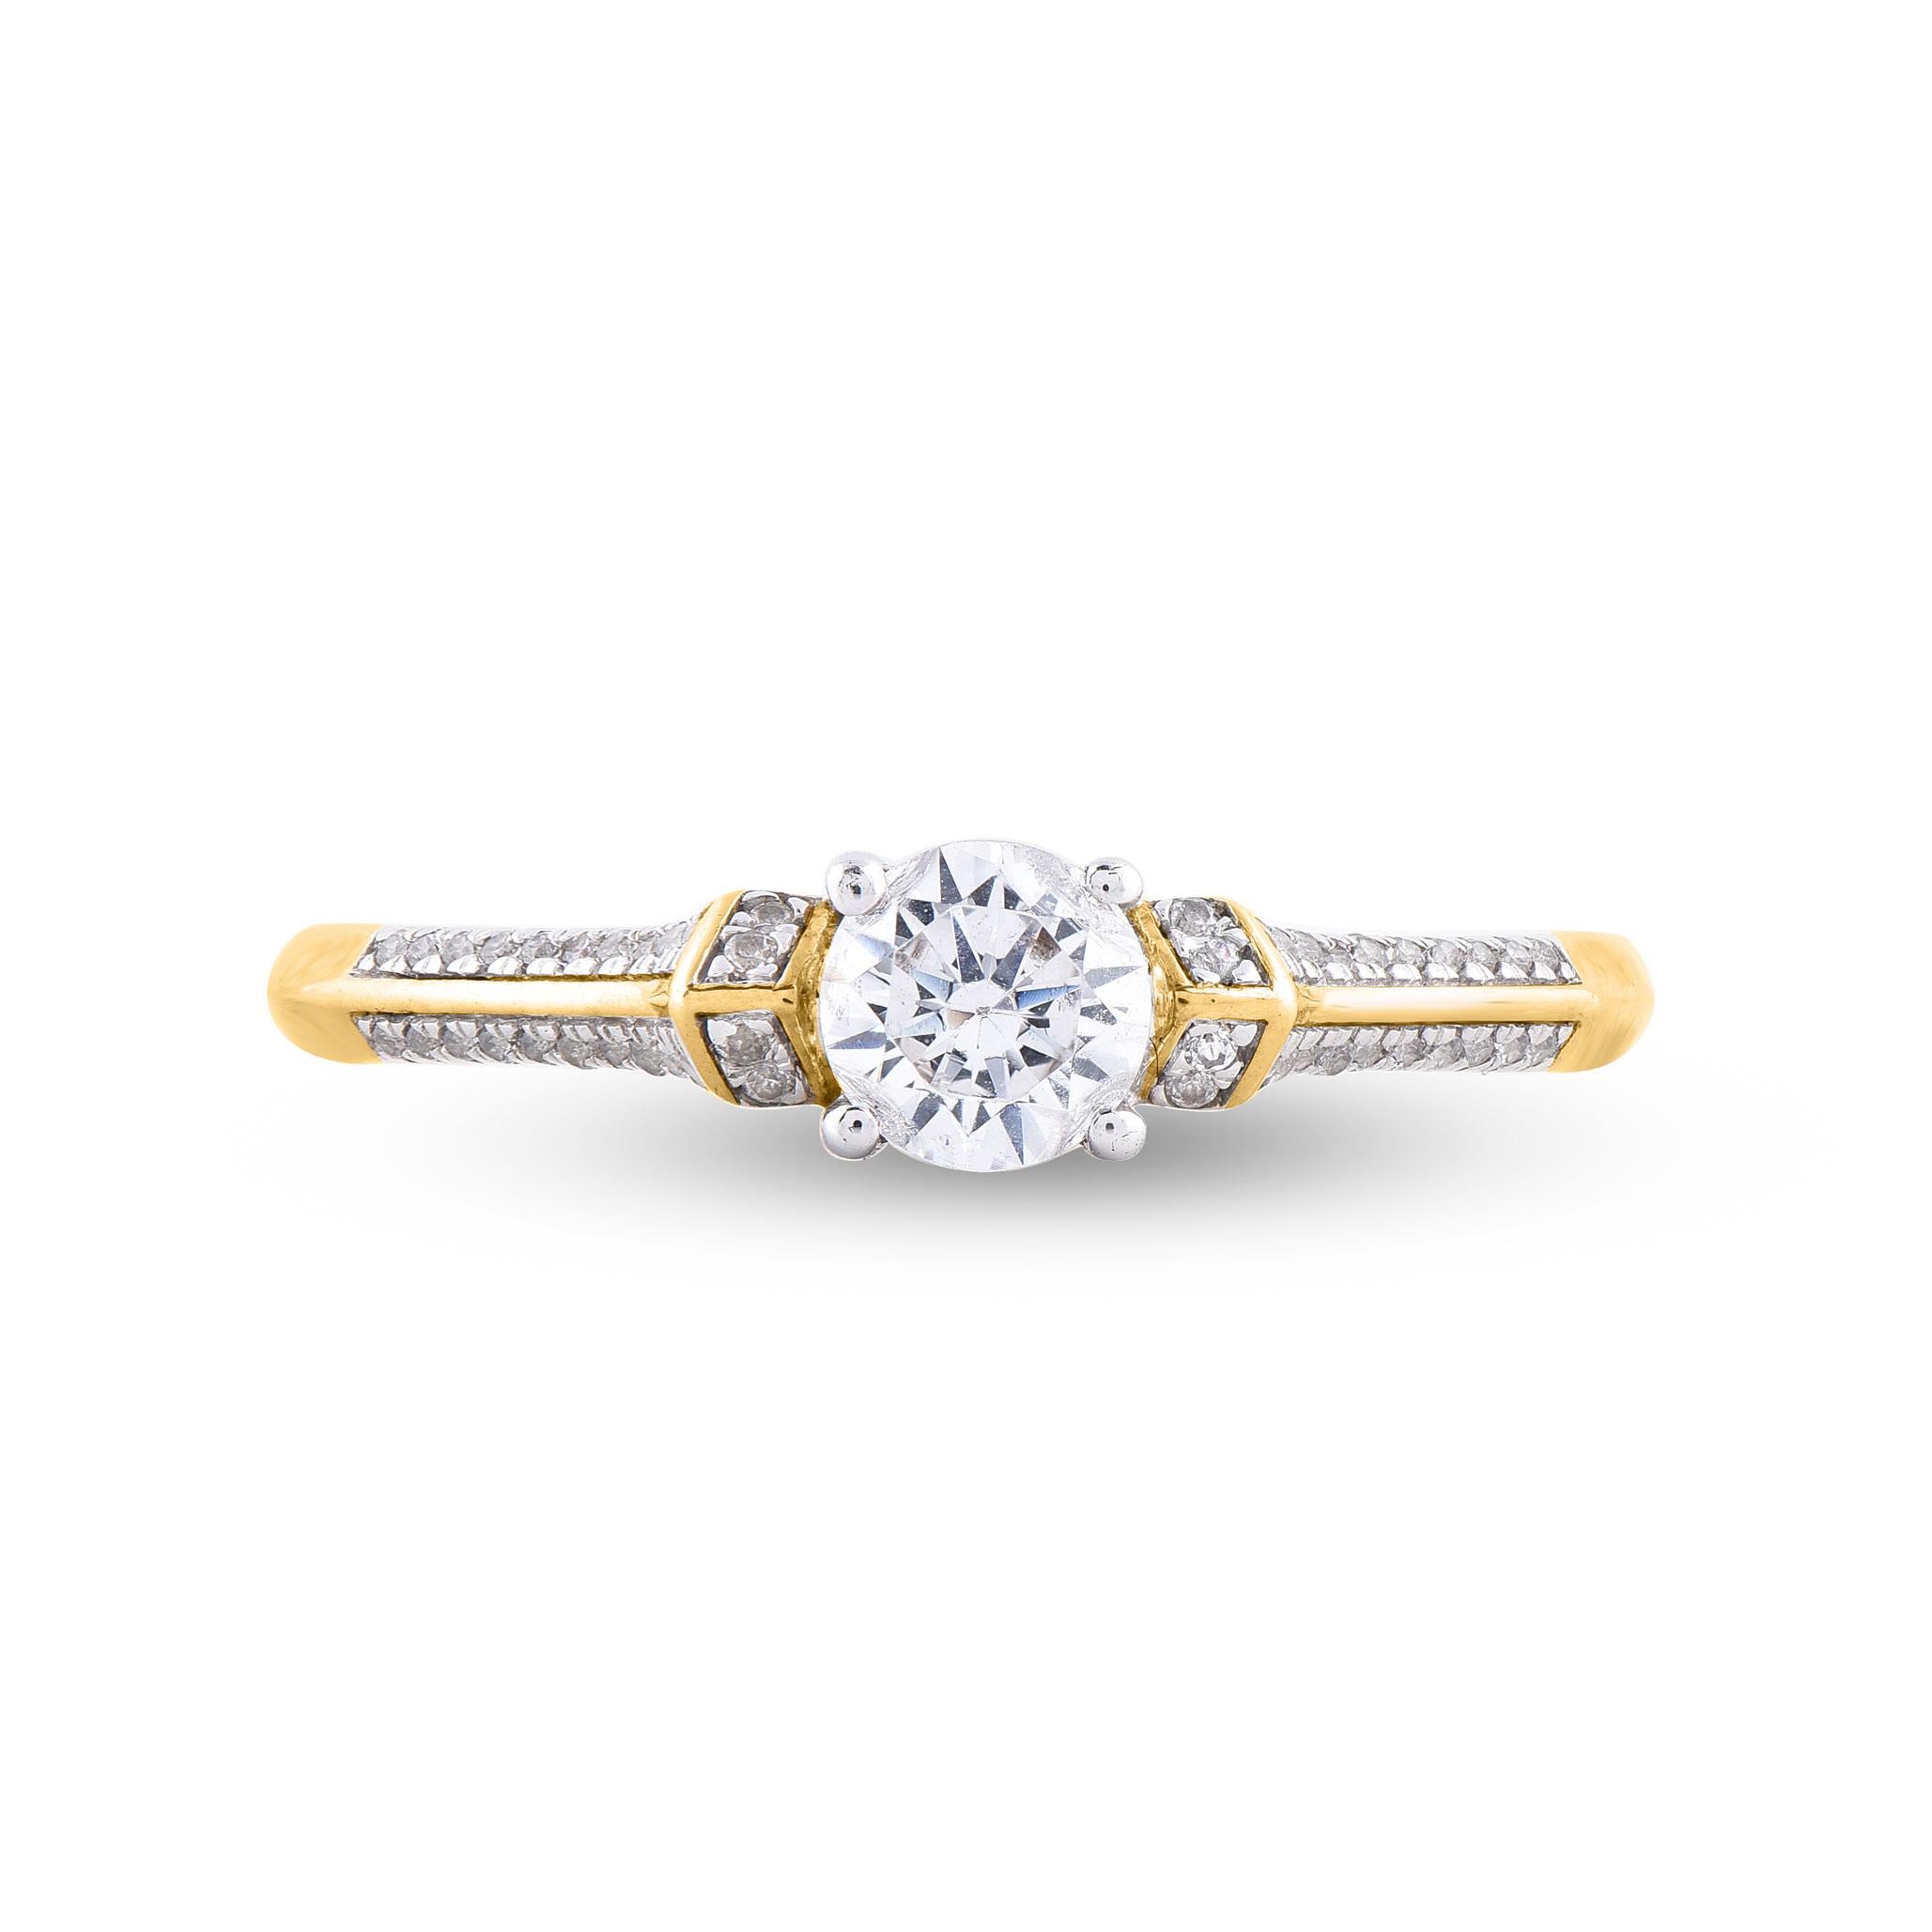 Make the moment memorable with this diamond engagement ring. Expertly crafted in 14 Karat yellow gold and shines with 49 brilliant cut and single cut diamond in prong setting. The total weight of diamonds 0.50 carat, H-I color and I2 Clarity. This